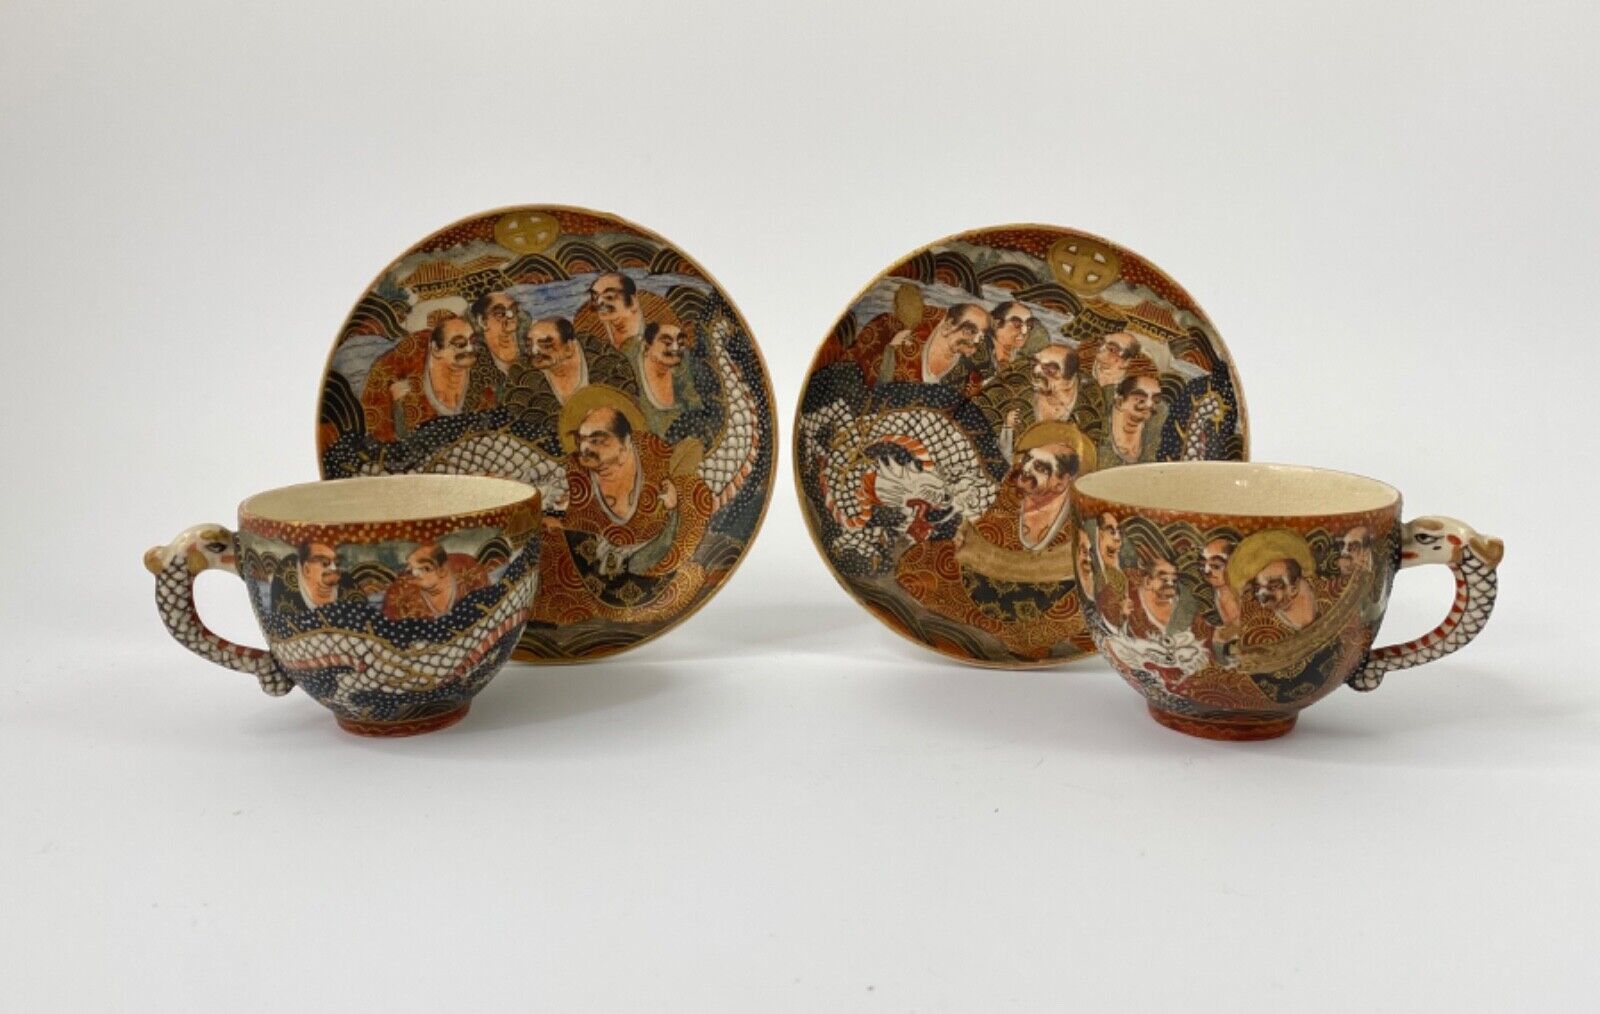 Satsuma pottery cups and saucers, ‘Thousand faces’ and dragons.Meiji Period.